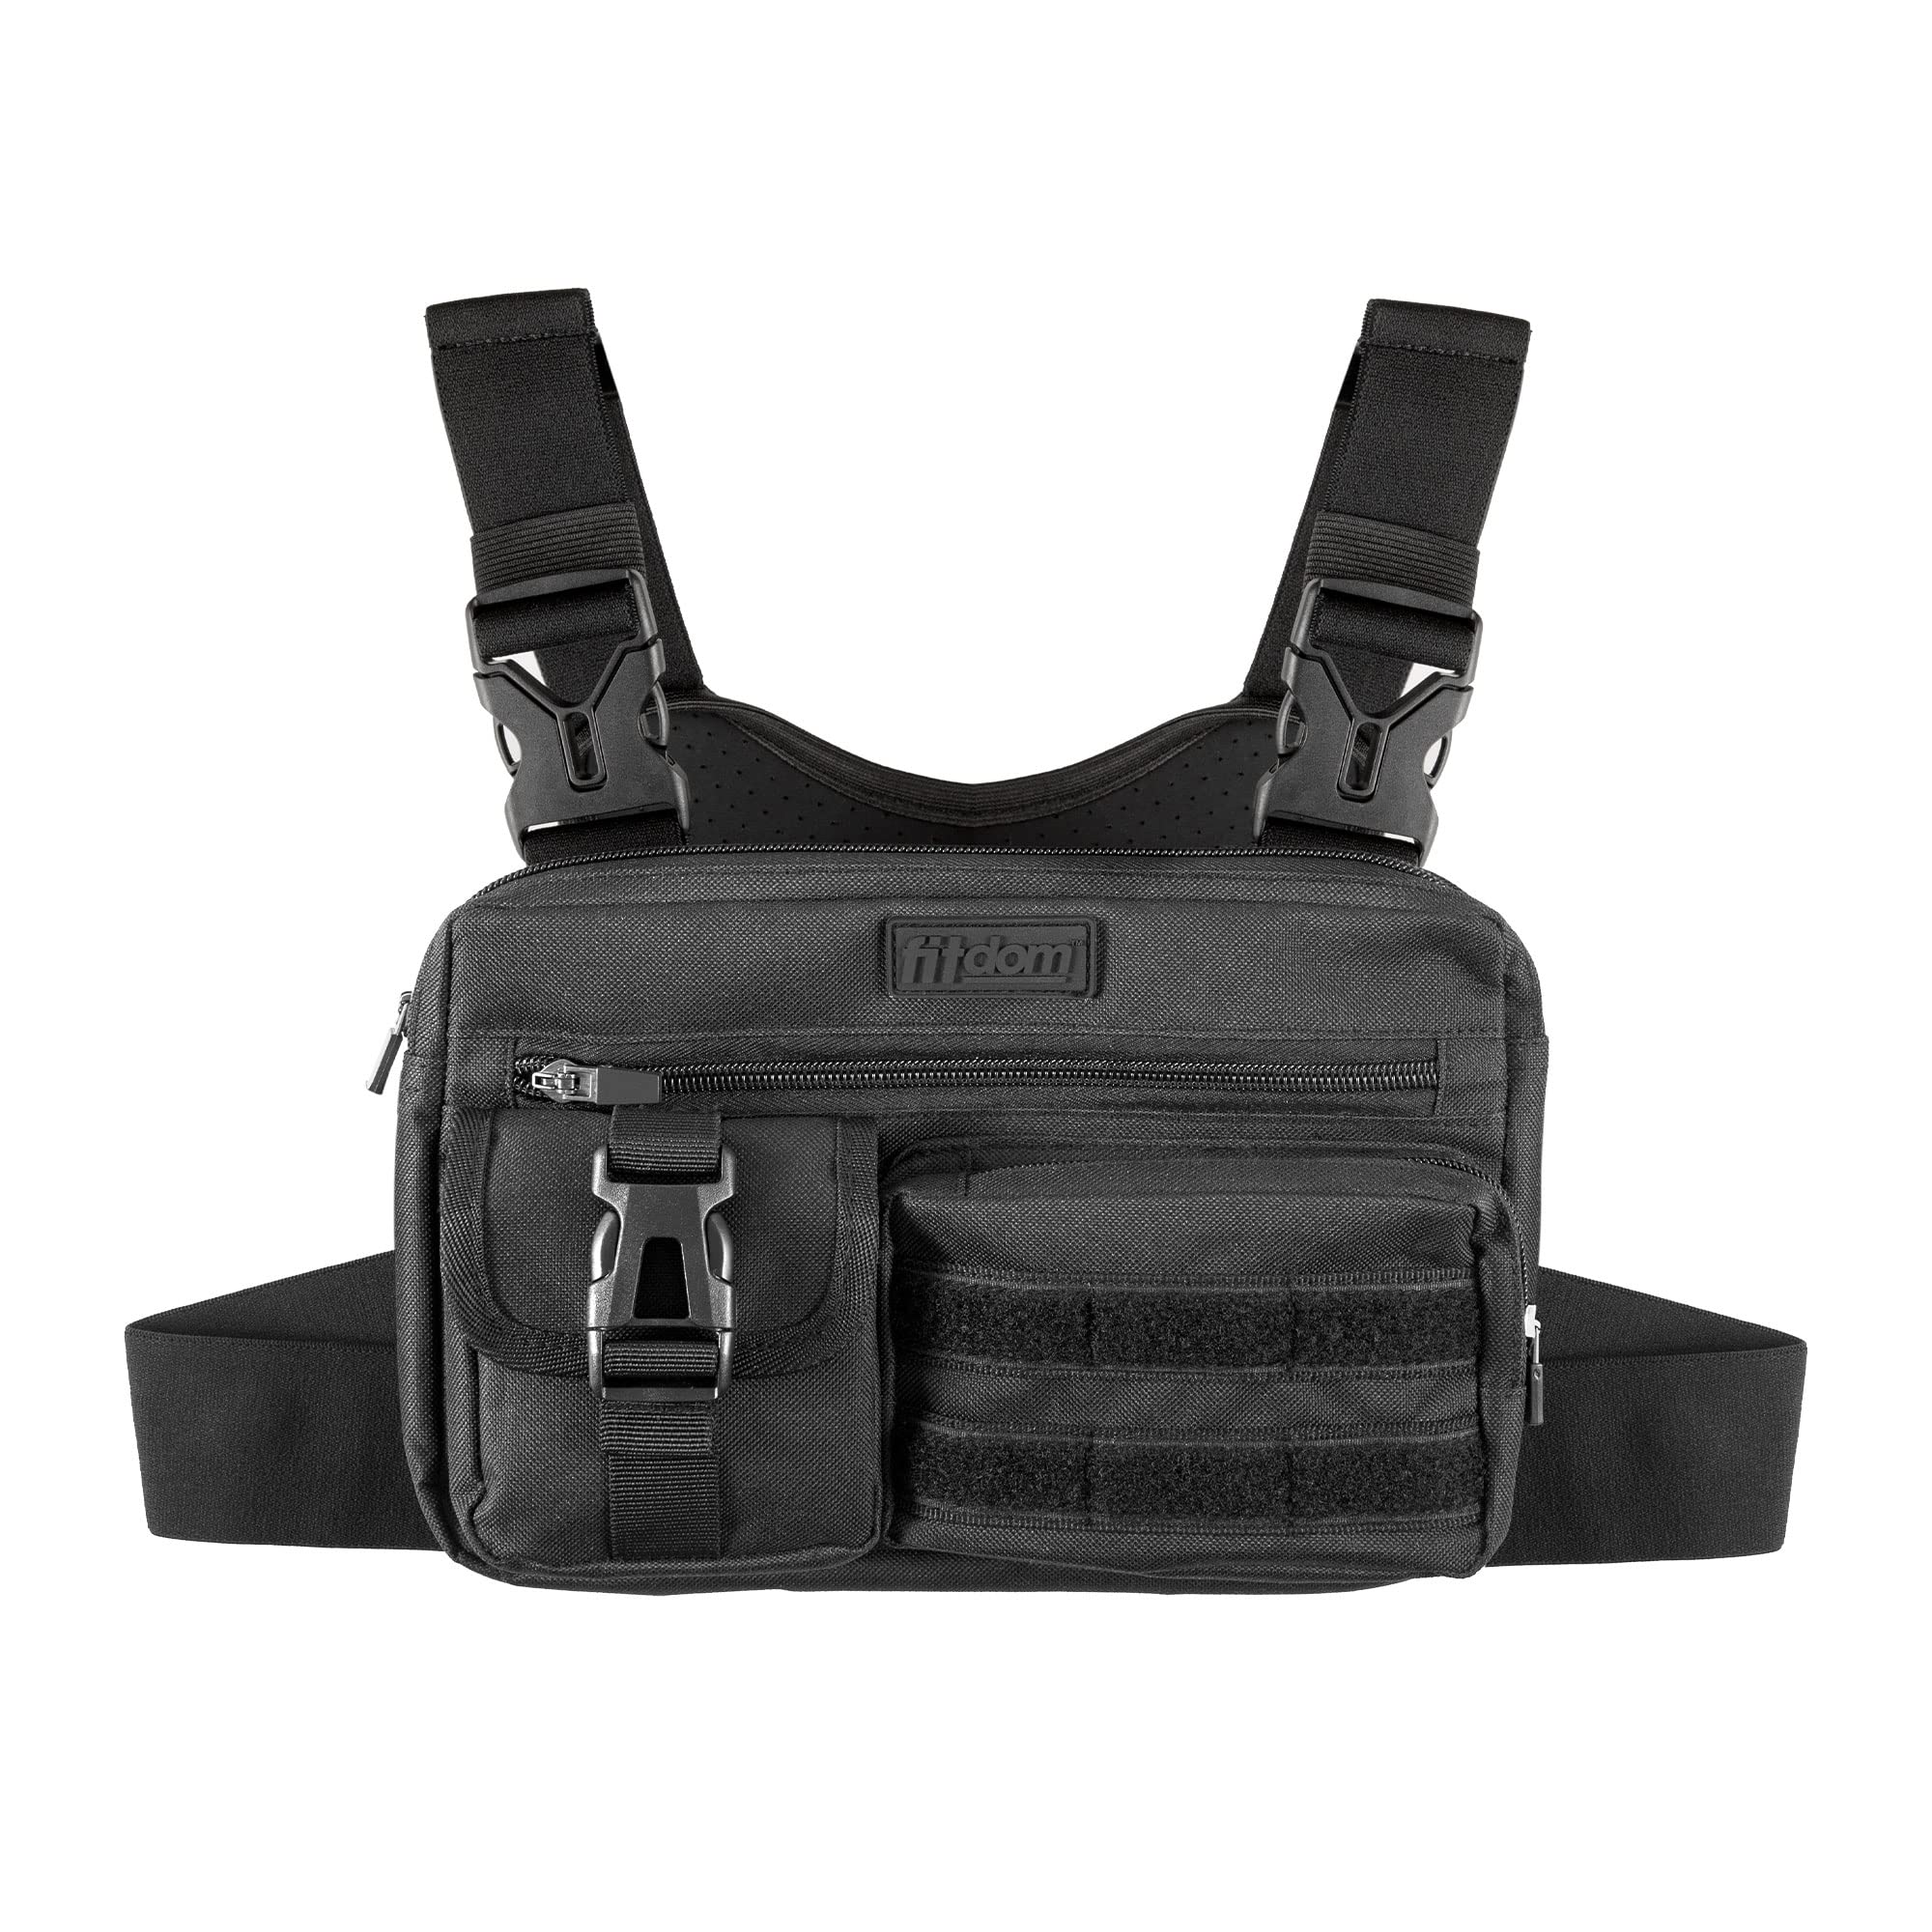 Ninja Sport Utility Chest Pack Vest With Phone Pocket and Facial